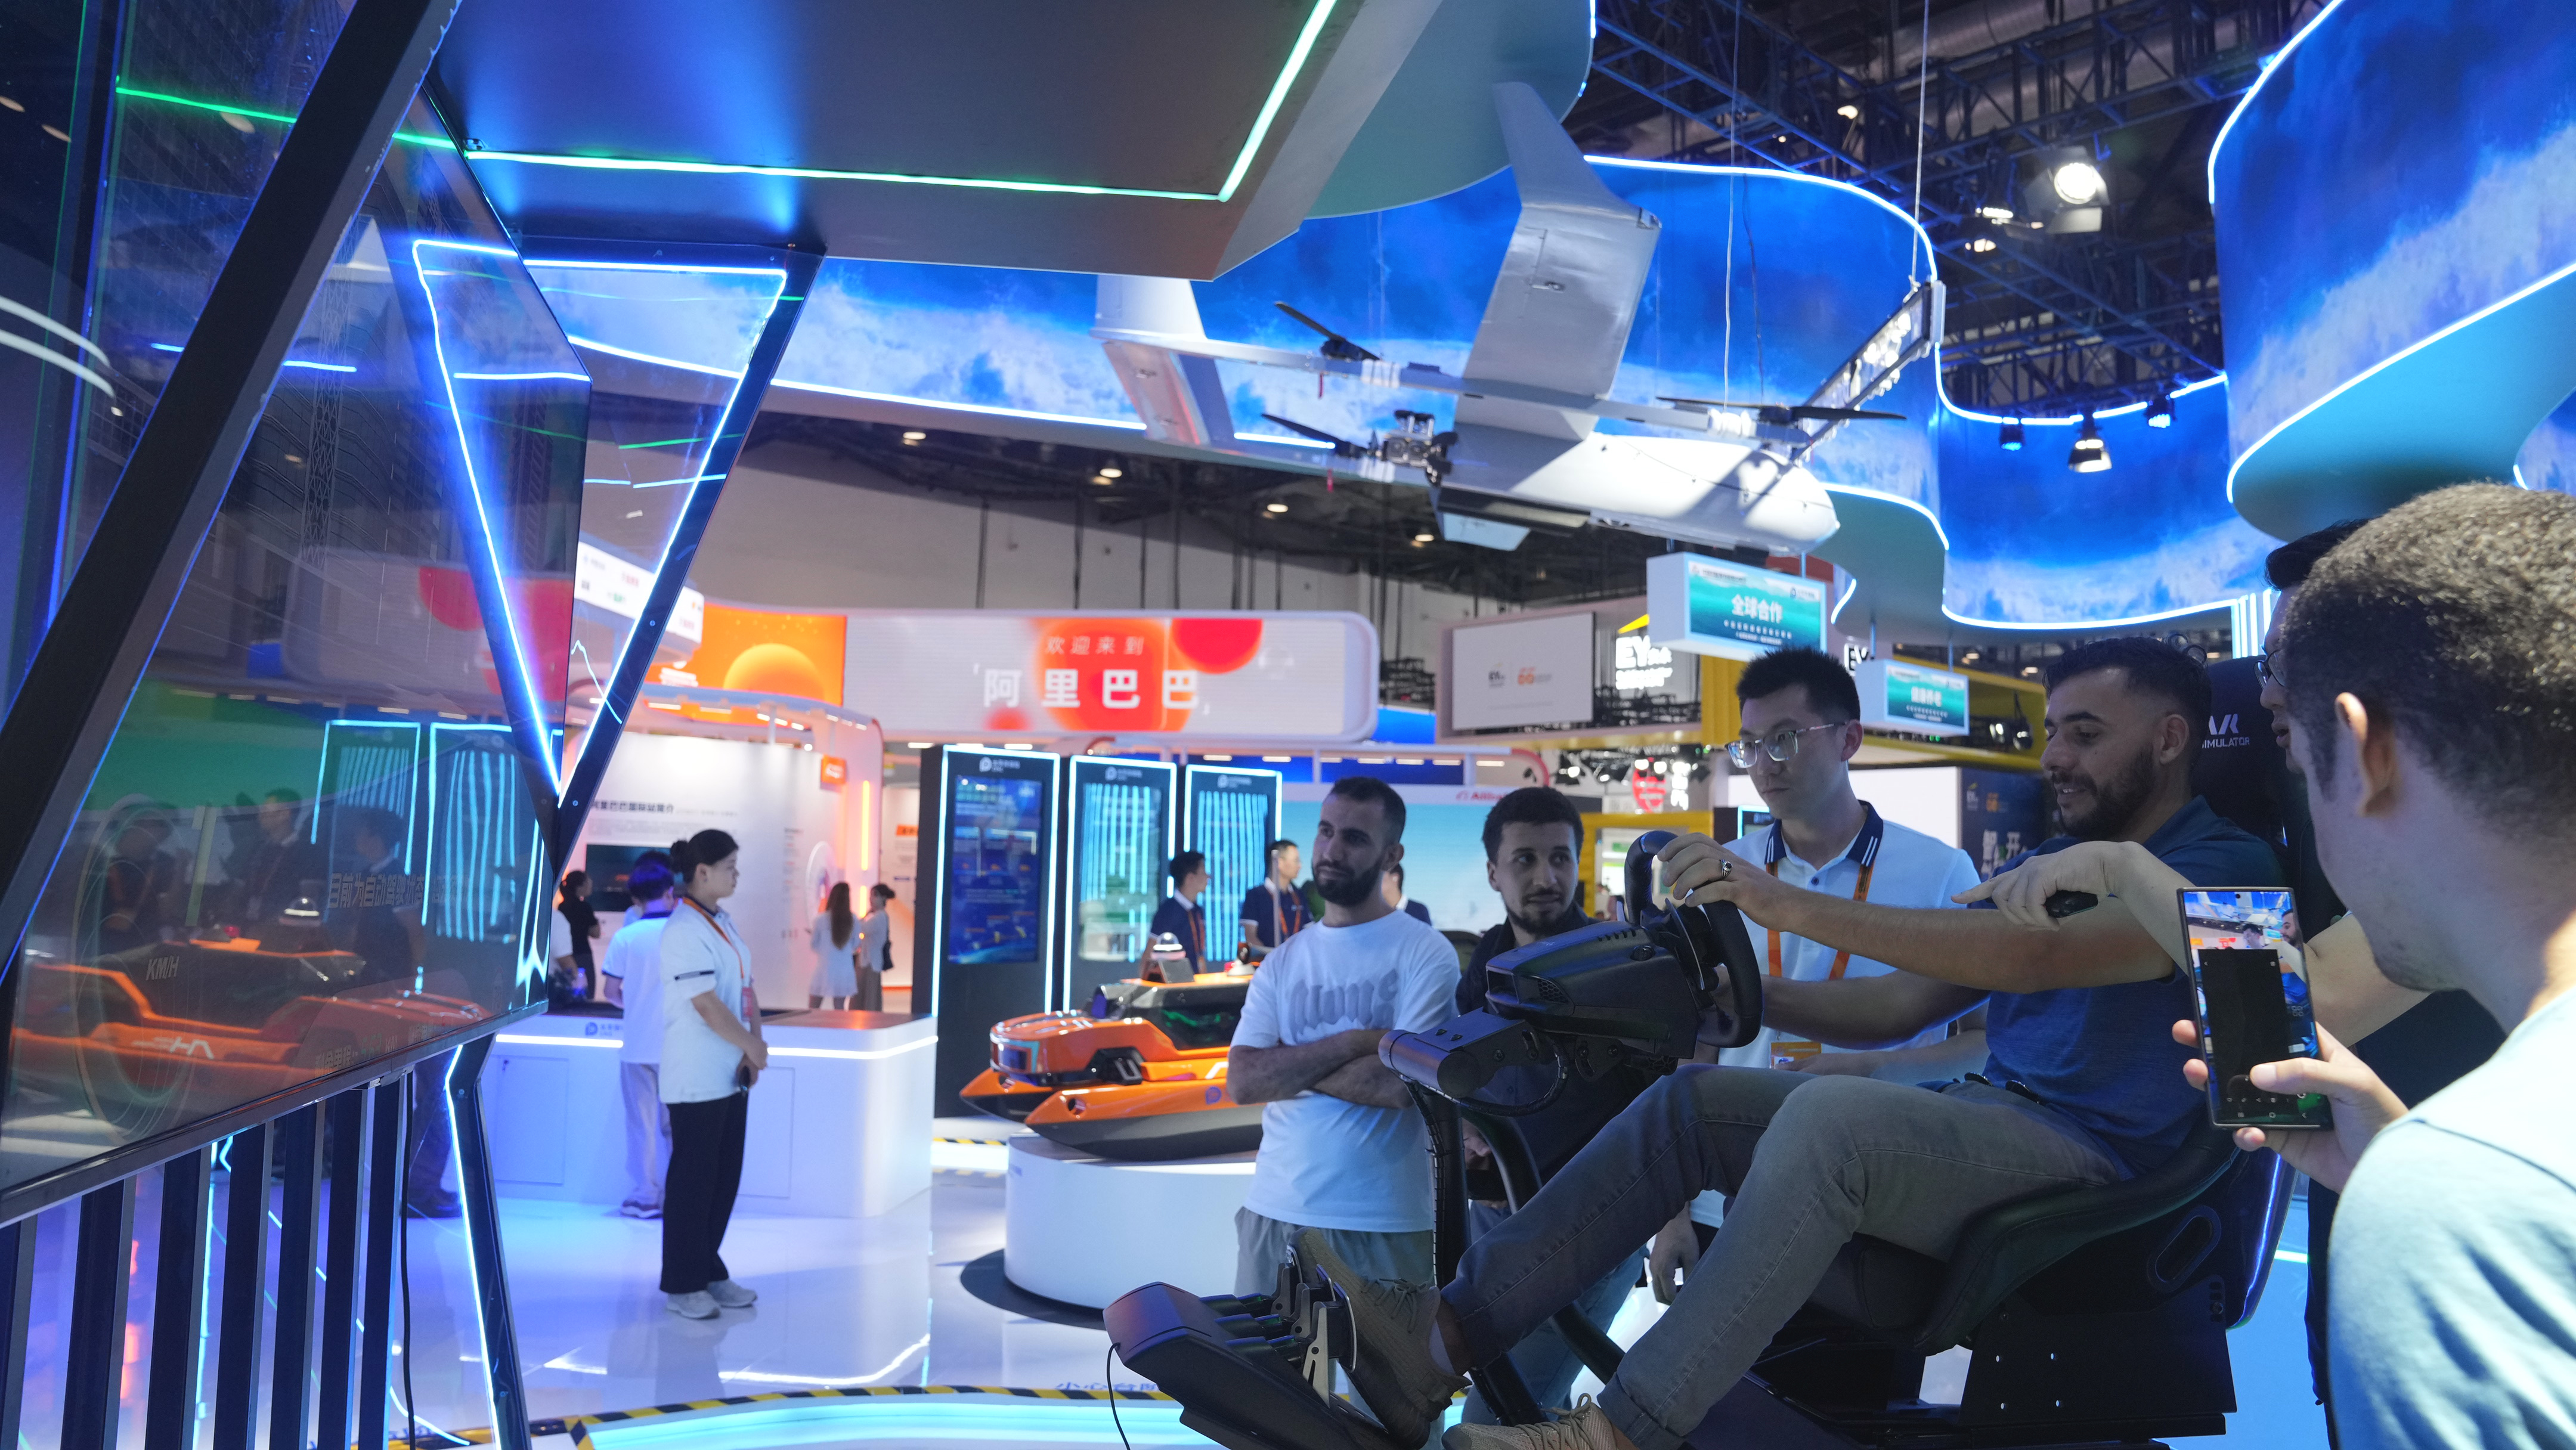 Visitors try driving at a booth.